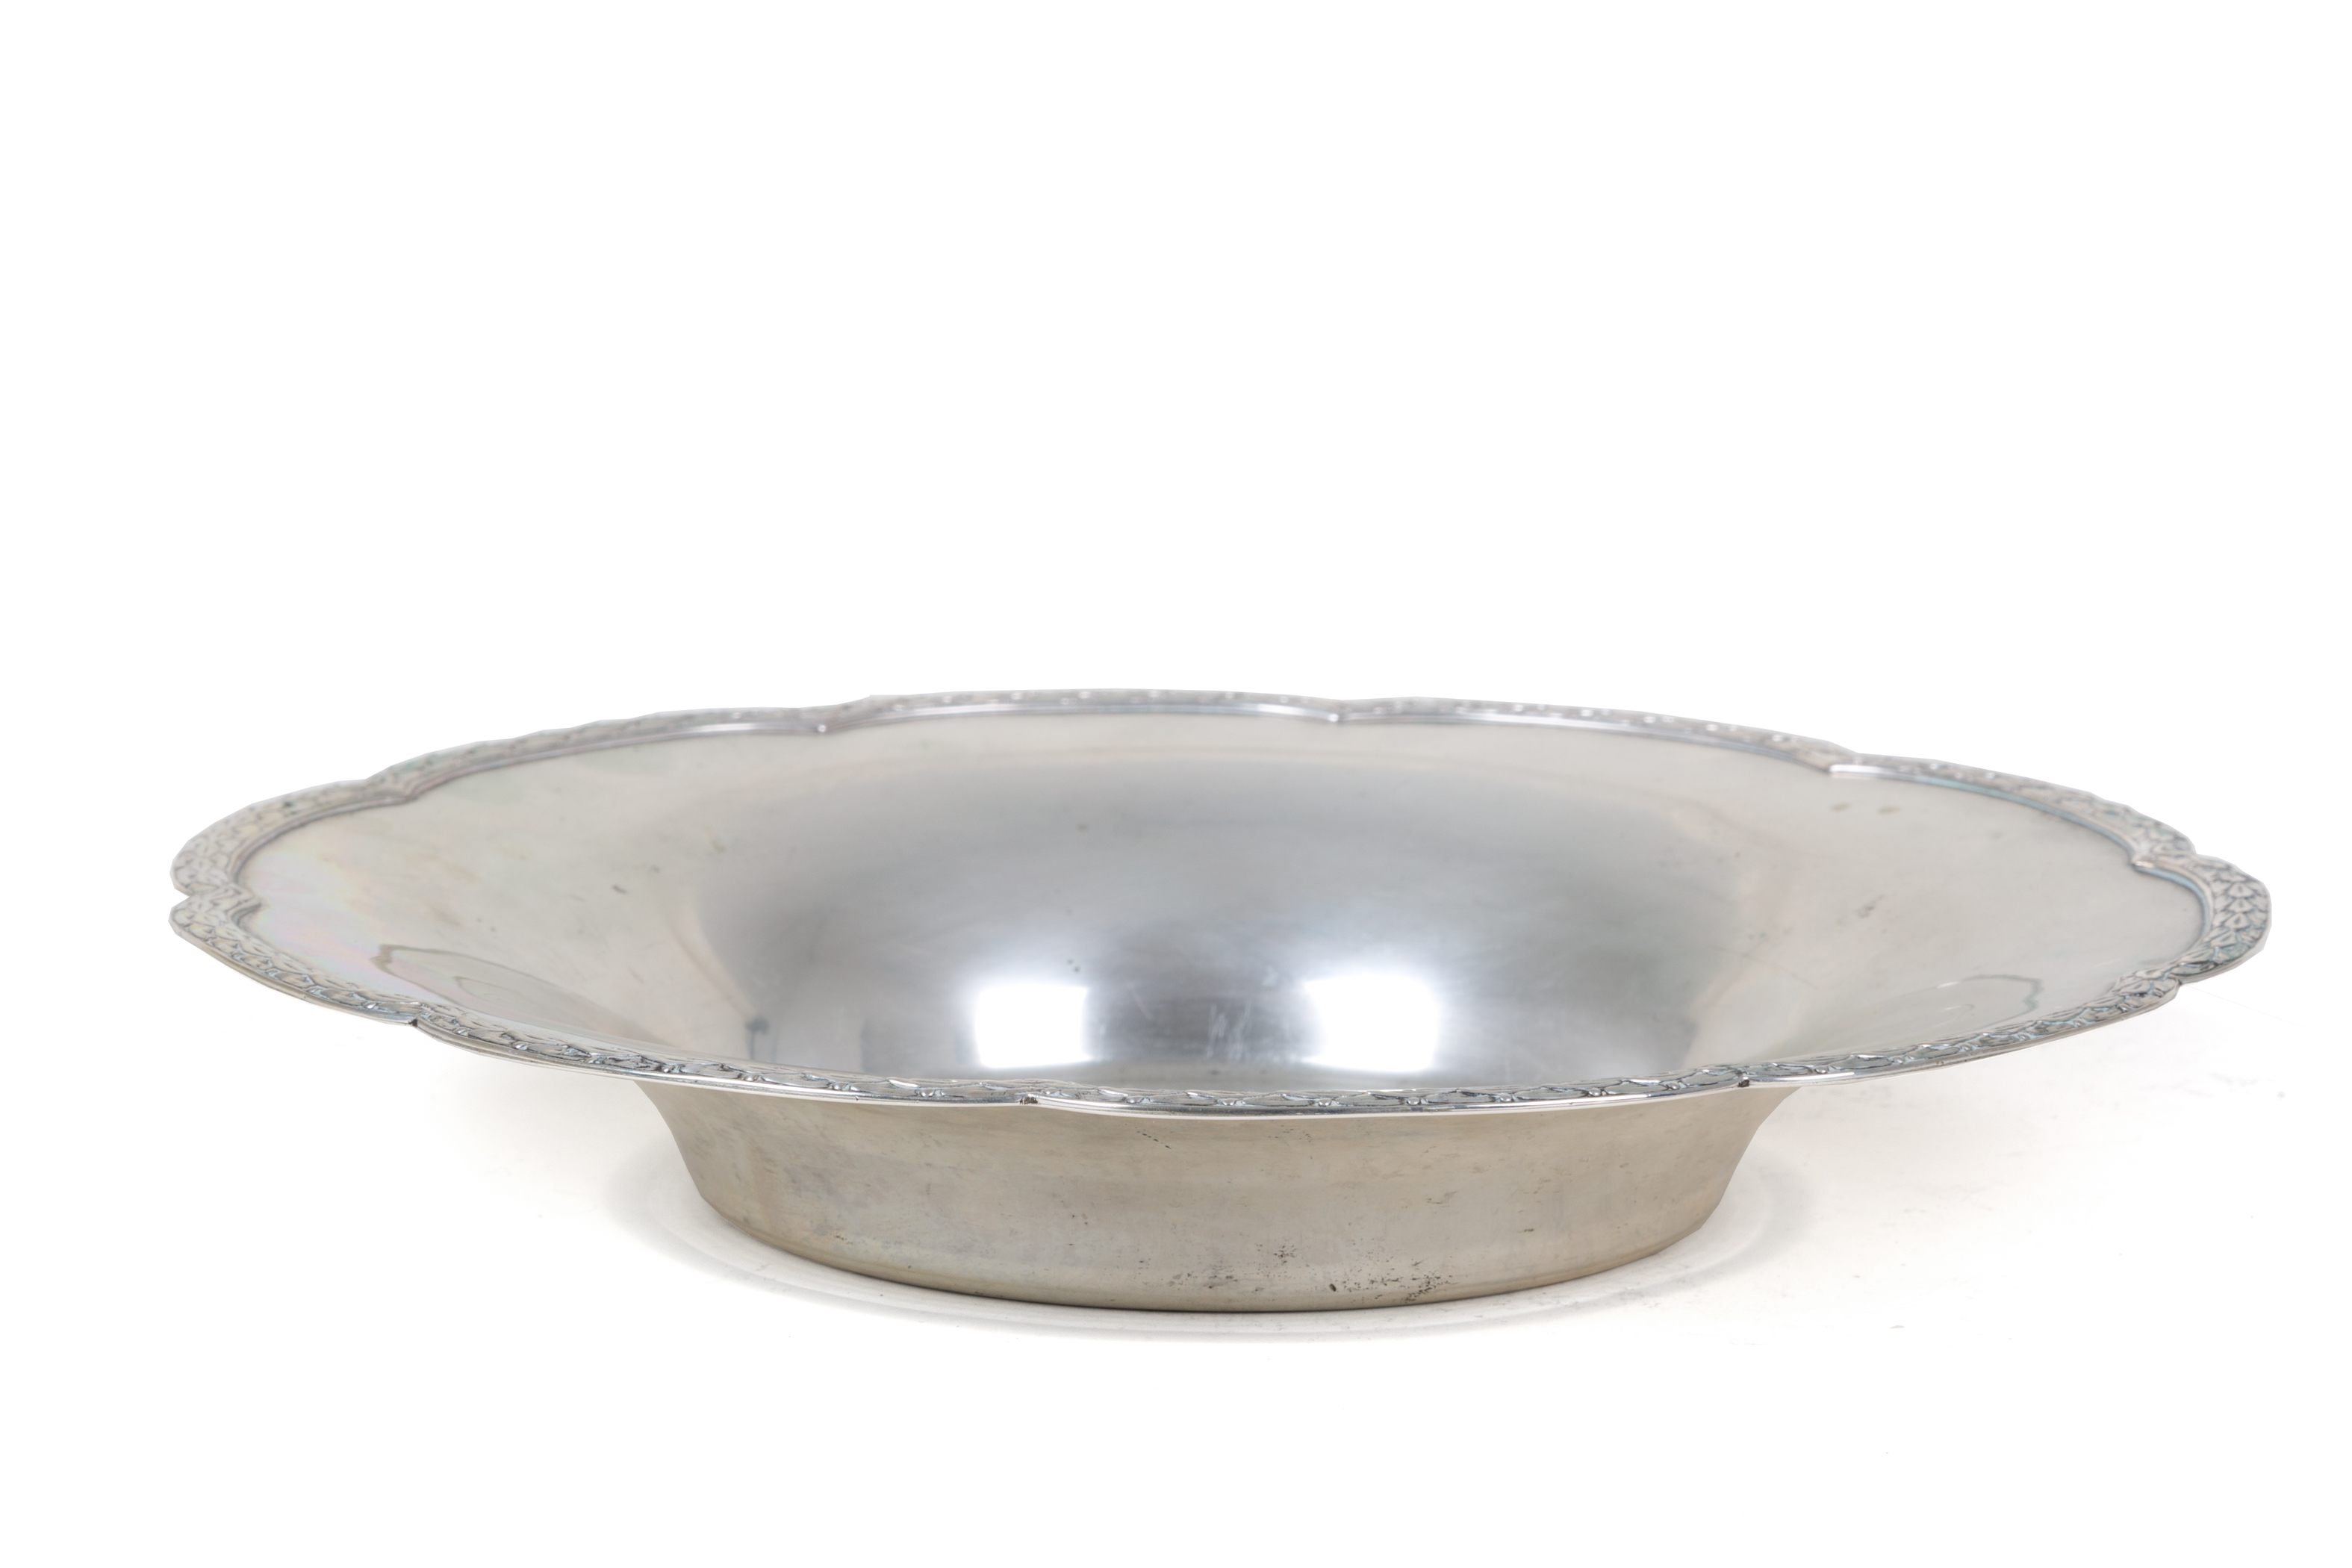 800 silver plate, gr. 635 ca. 20th century - Image 2 of 4